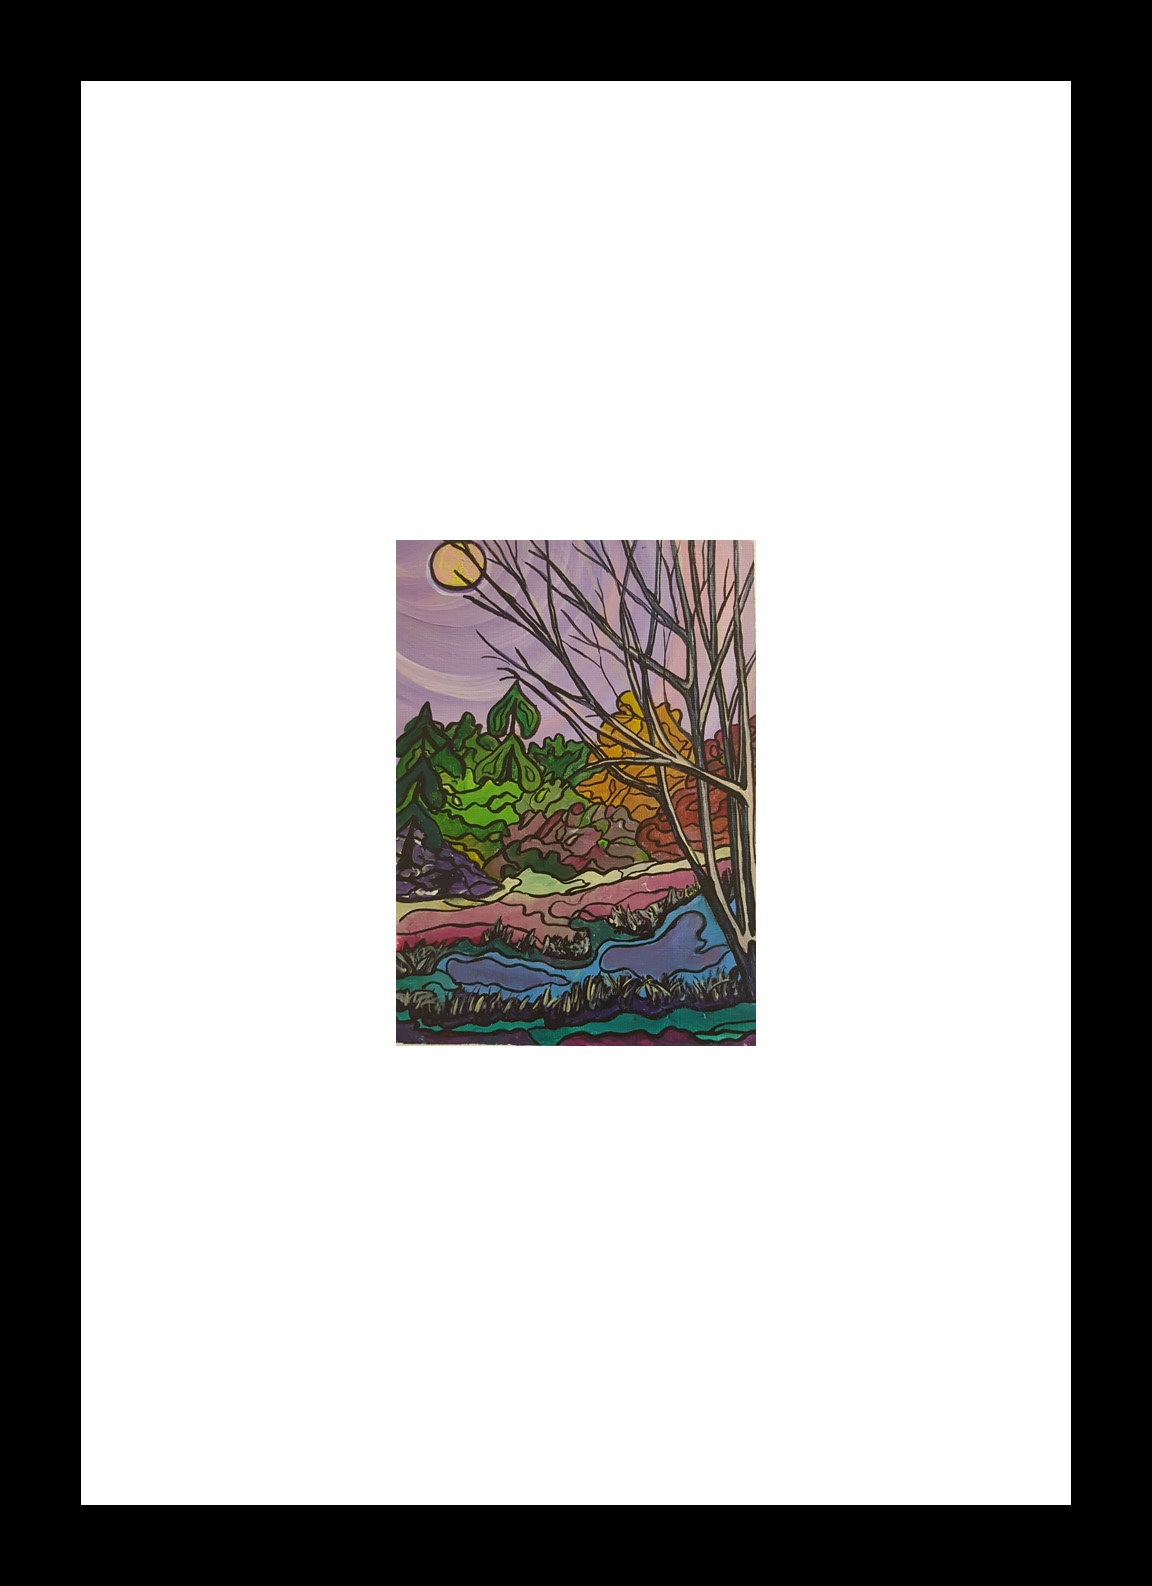 "Duck Pond" [2018]
Image: 5" x 7". Framed: 10" x 16"
Acrylic on 246 lb. paper
$200.00